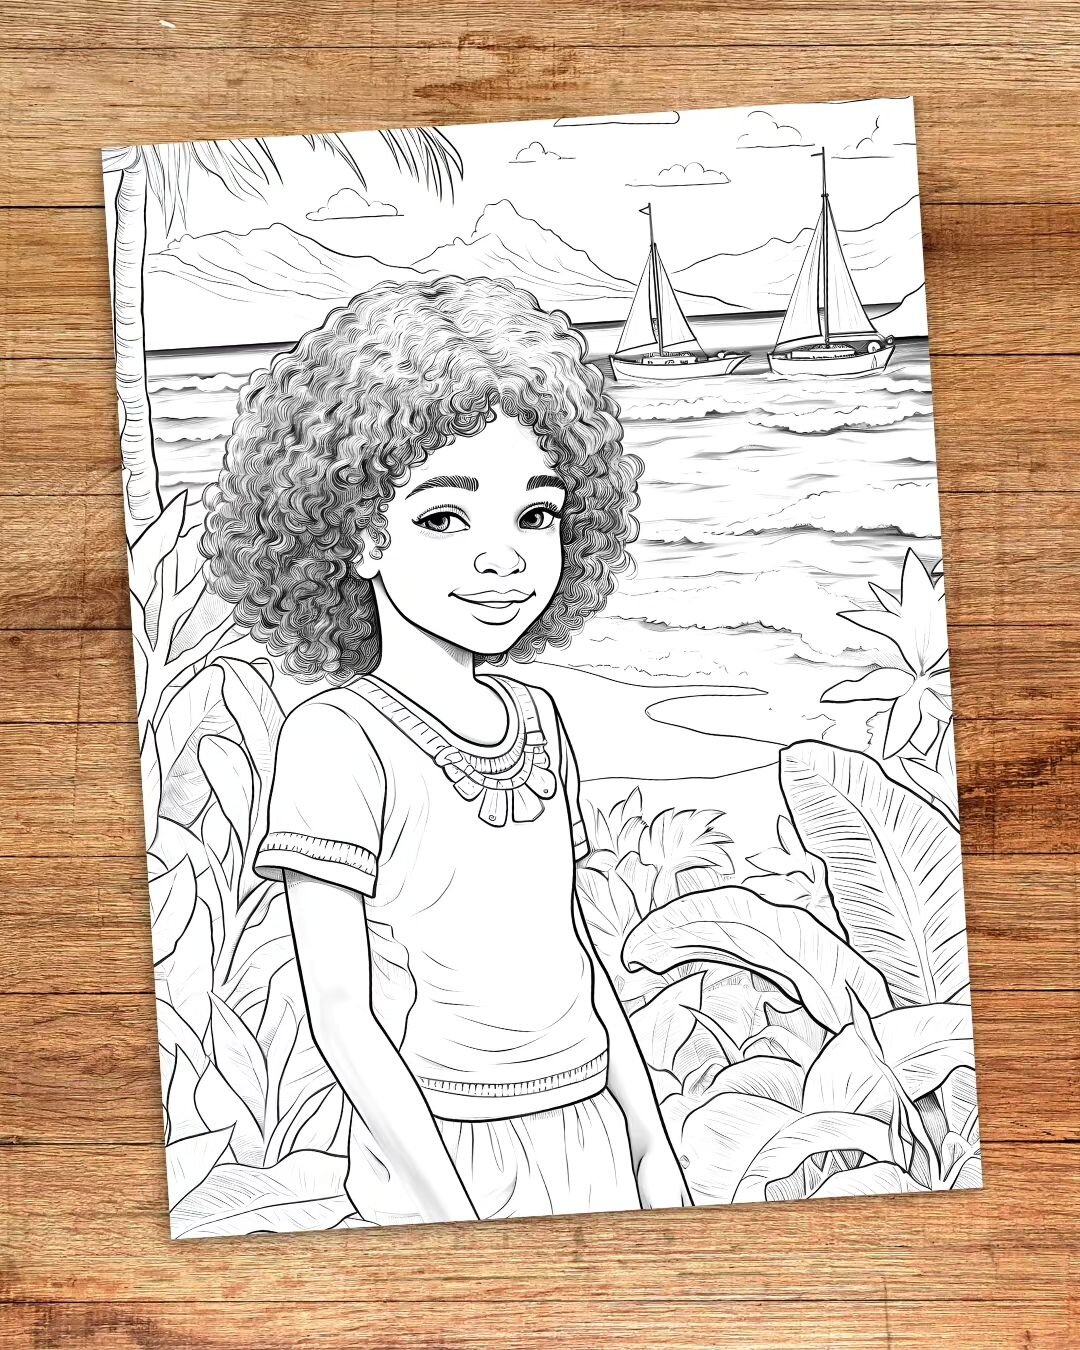 Every page has a story. Here's a peek into the inspiration behind 'Caribbean Life'. Our first book captures memories, adventures, and dreams we wanted to share. Have you colored your dream yet? 🌅 #TheStoryBehind #rtpublishingco
#coloringbook